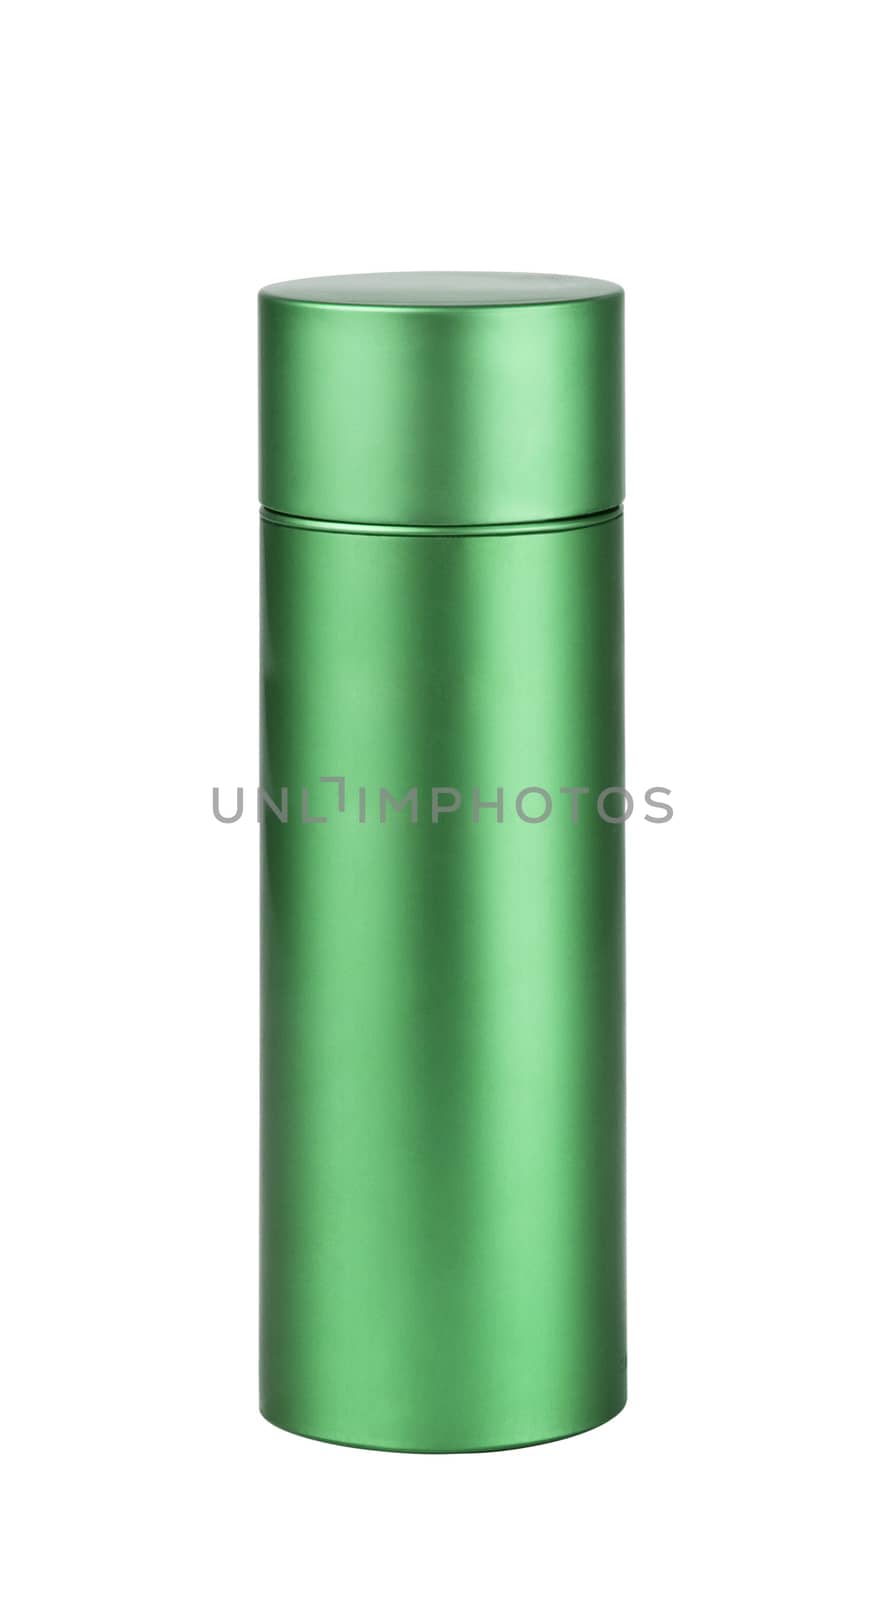 Bottle. On a white background